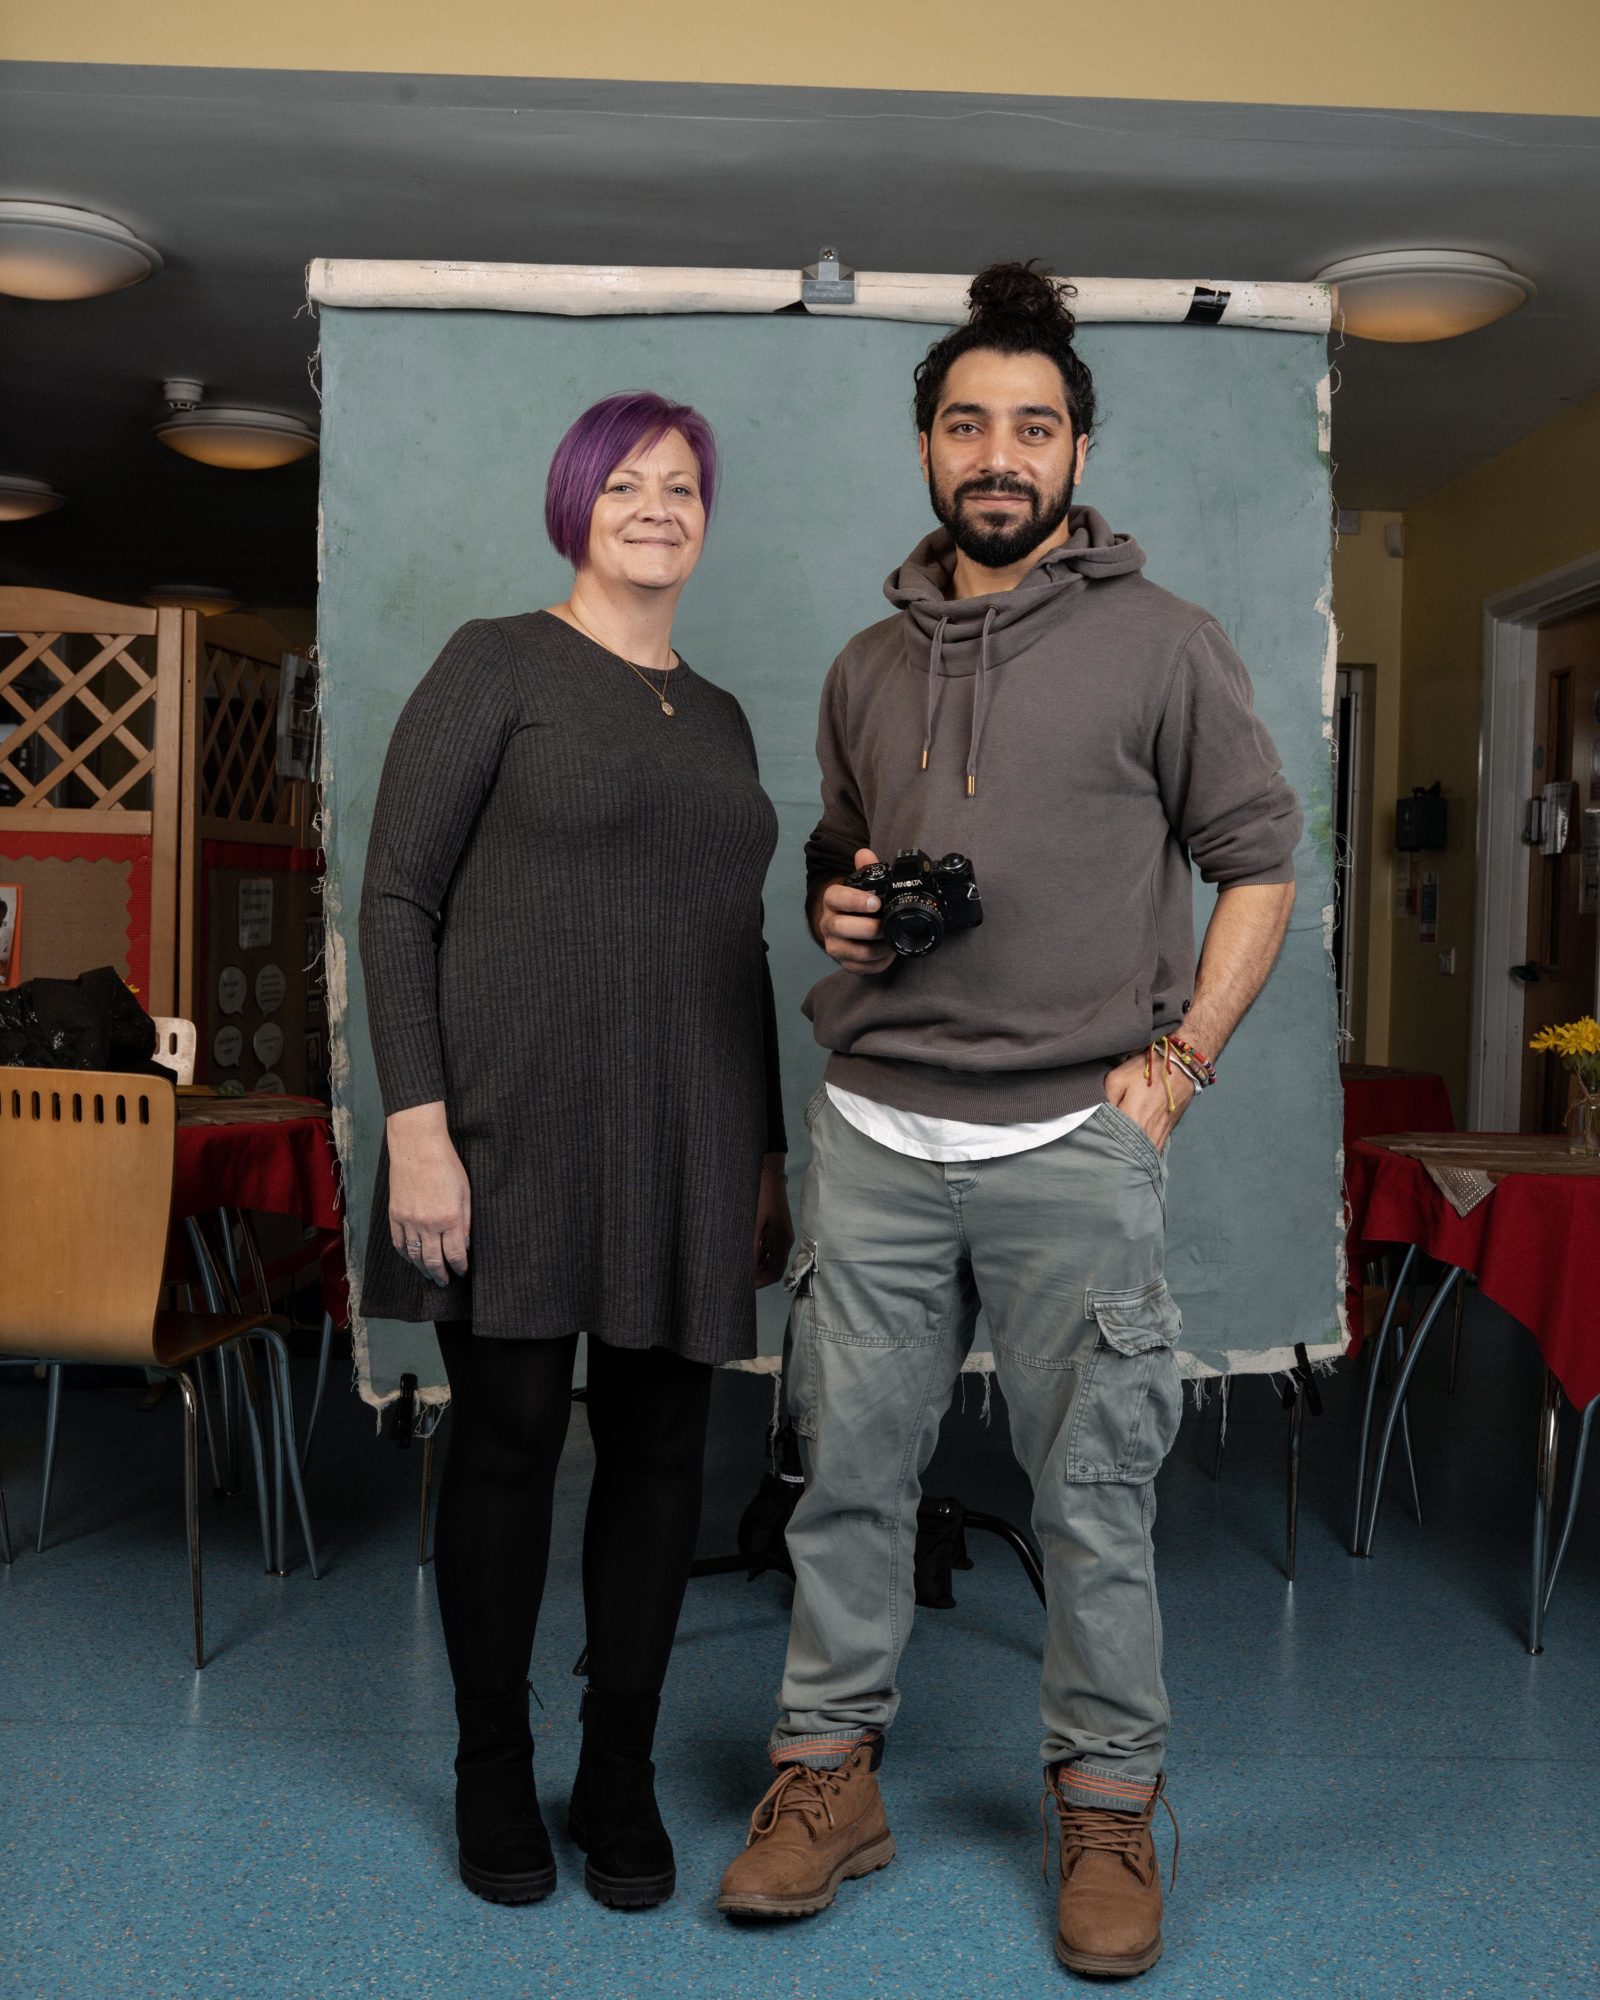 A woman with purple hair stands next to a man on a photography set in front of a screen